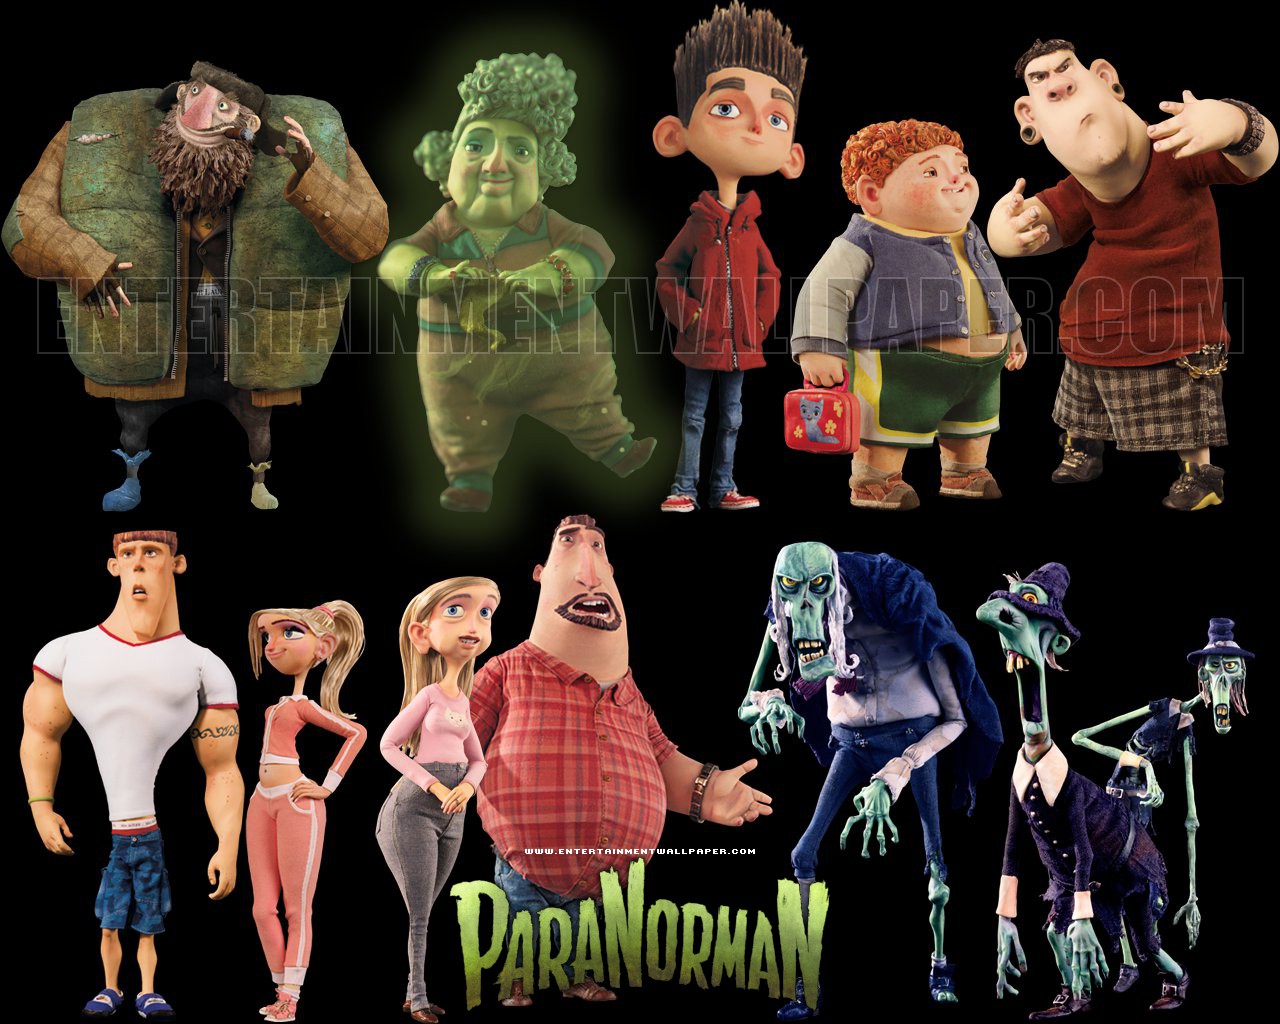 Amazing Paranorman Pictures & Backgrounds